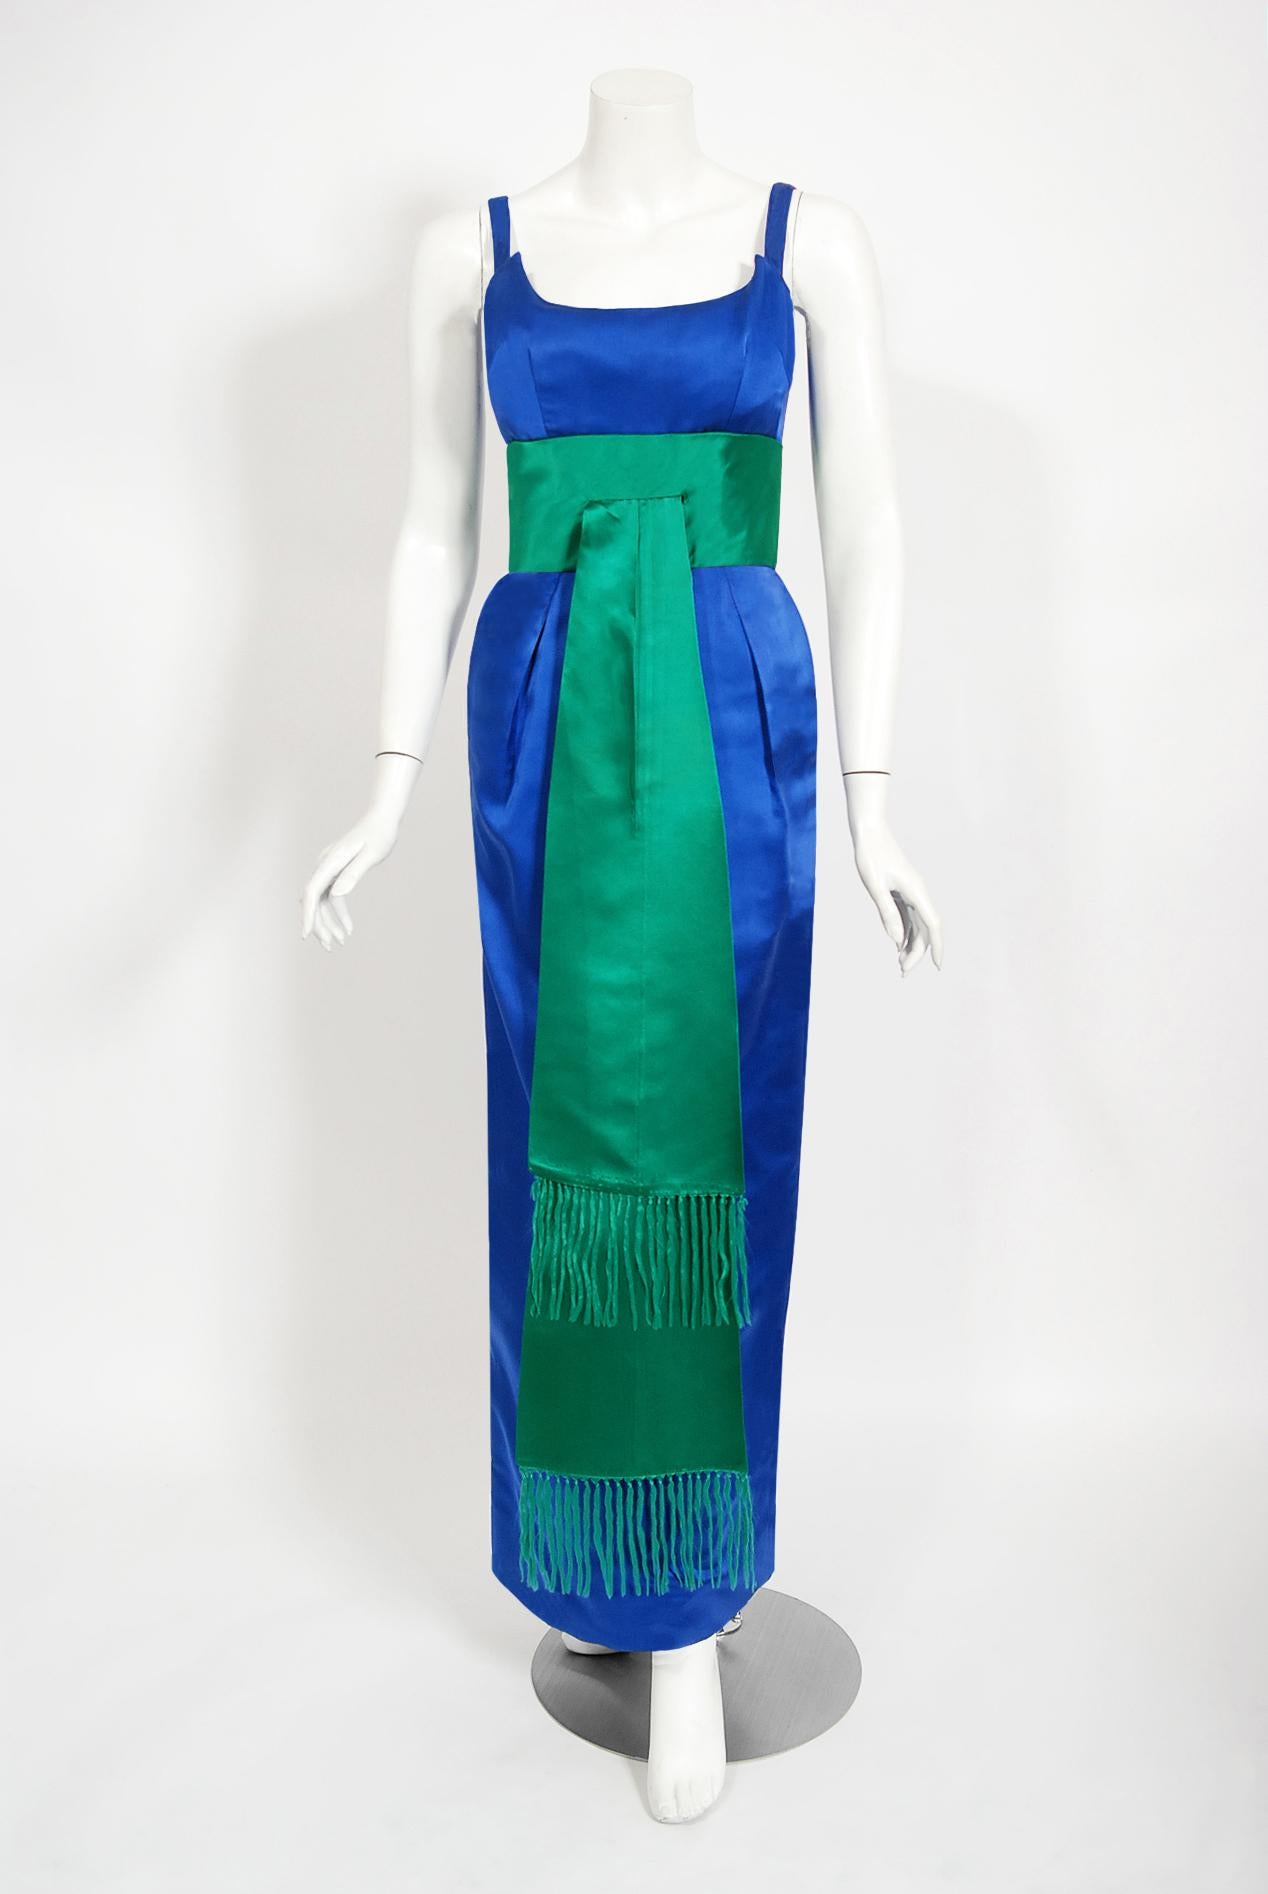 Sensational Oleg Cassini sapphire blue and emerald green sculpted hourglass gown dating back to the late 1950's. Oleg Cassini was a French-born American fashion designer who dressed numerous stars, creating some memorable moments in celebrity